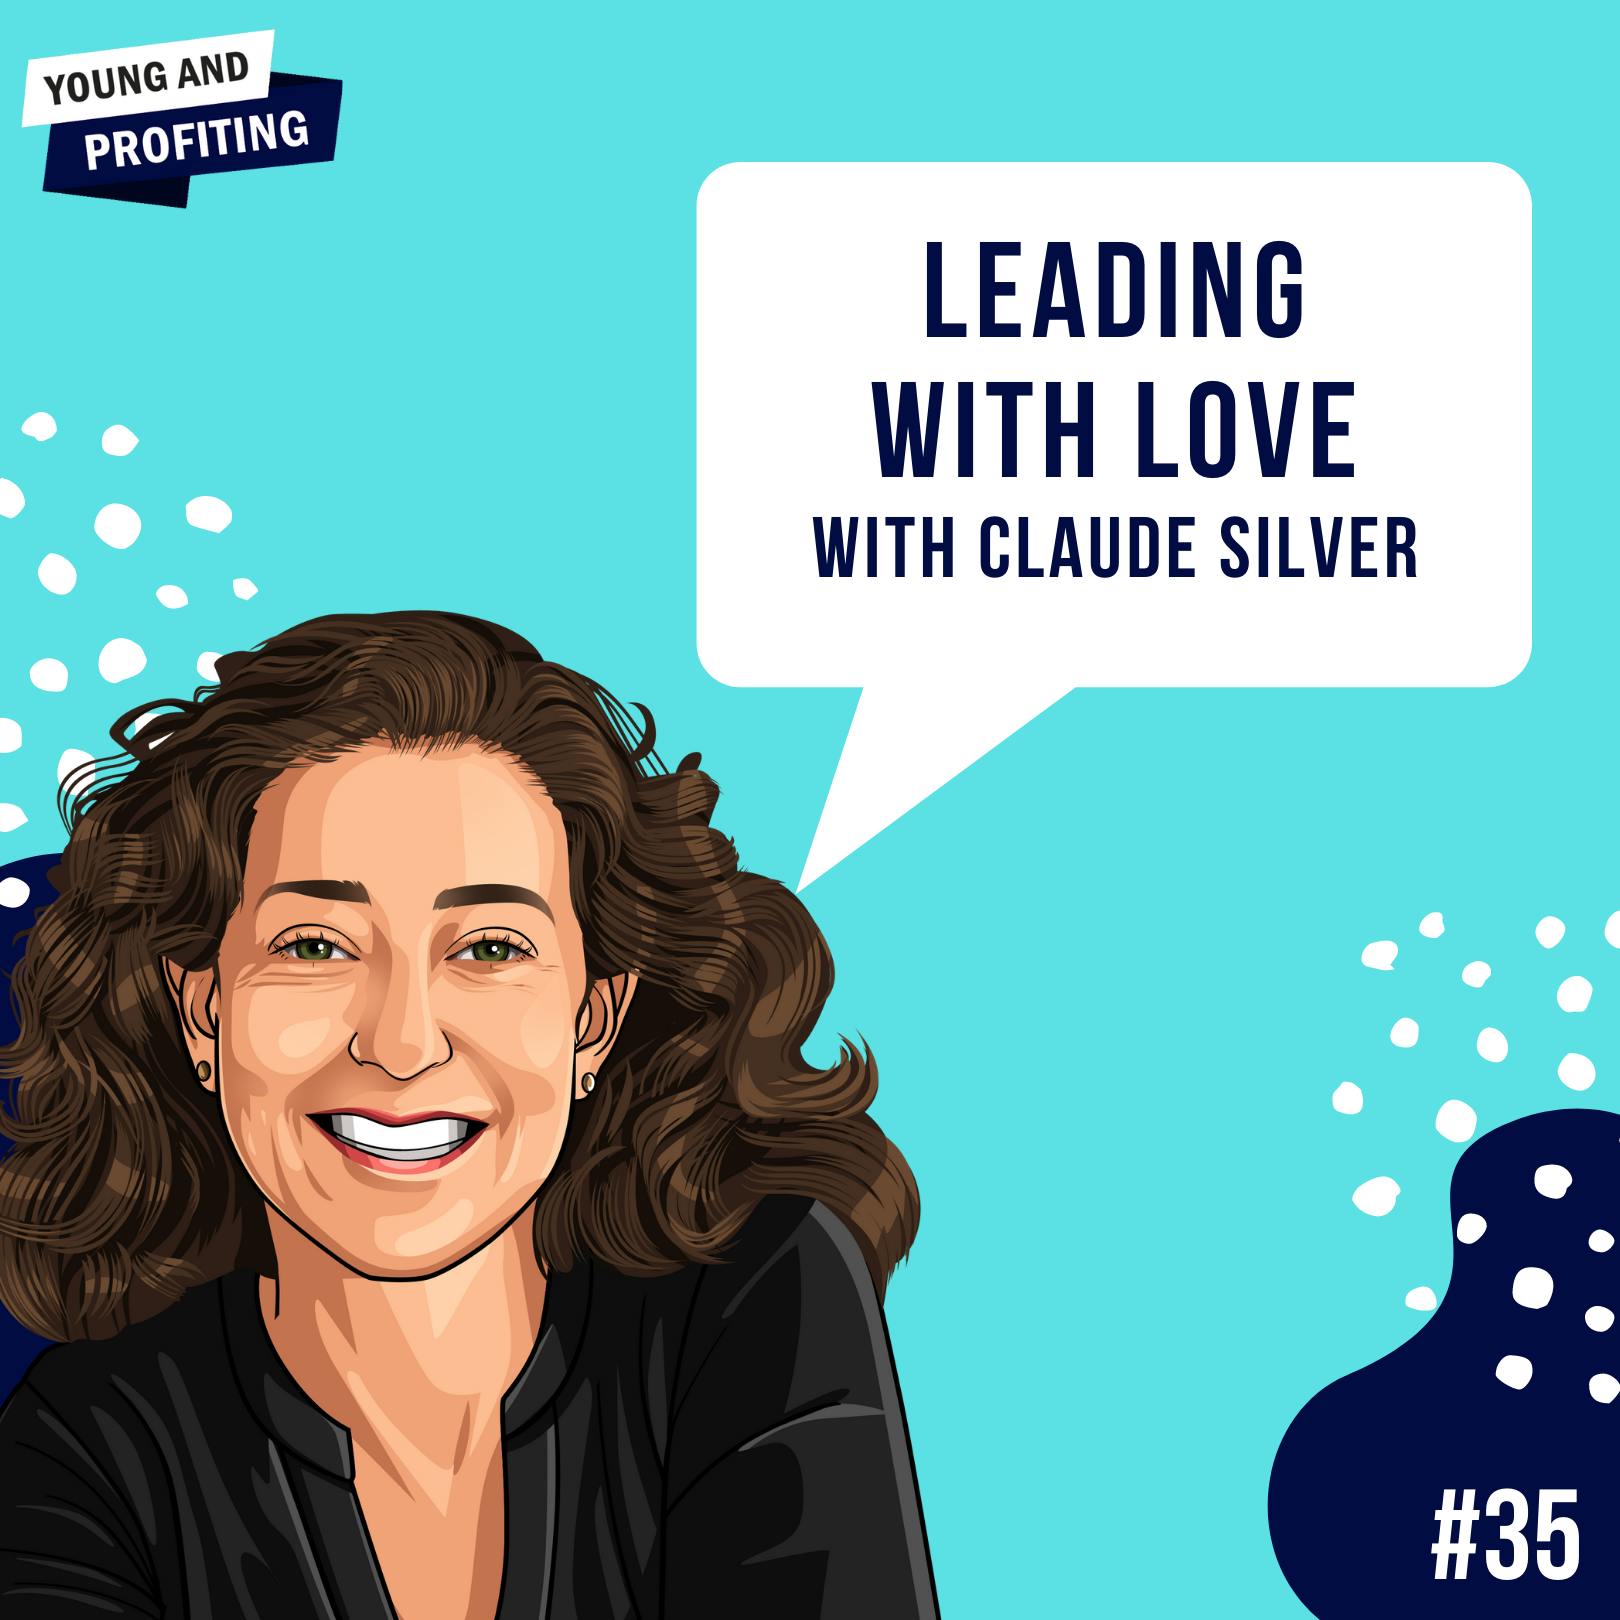 Claude Silver: Leading with Love | E35 by Hala Taha | YAP Media Network